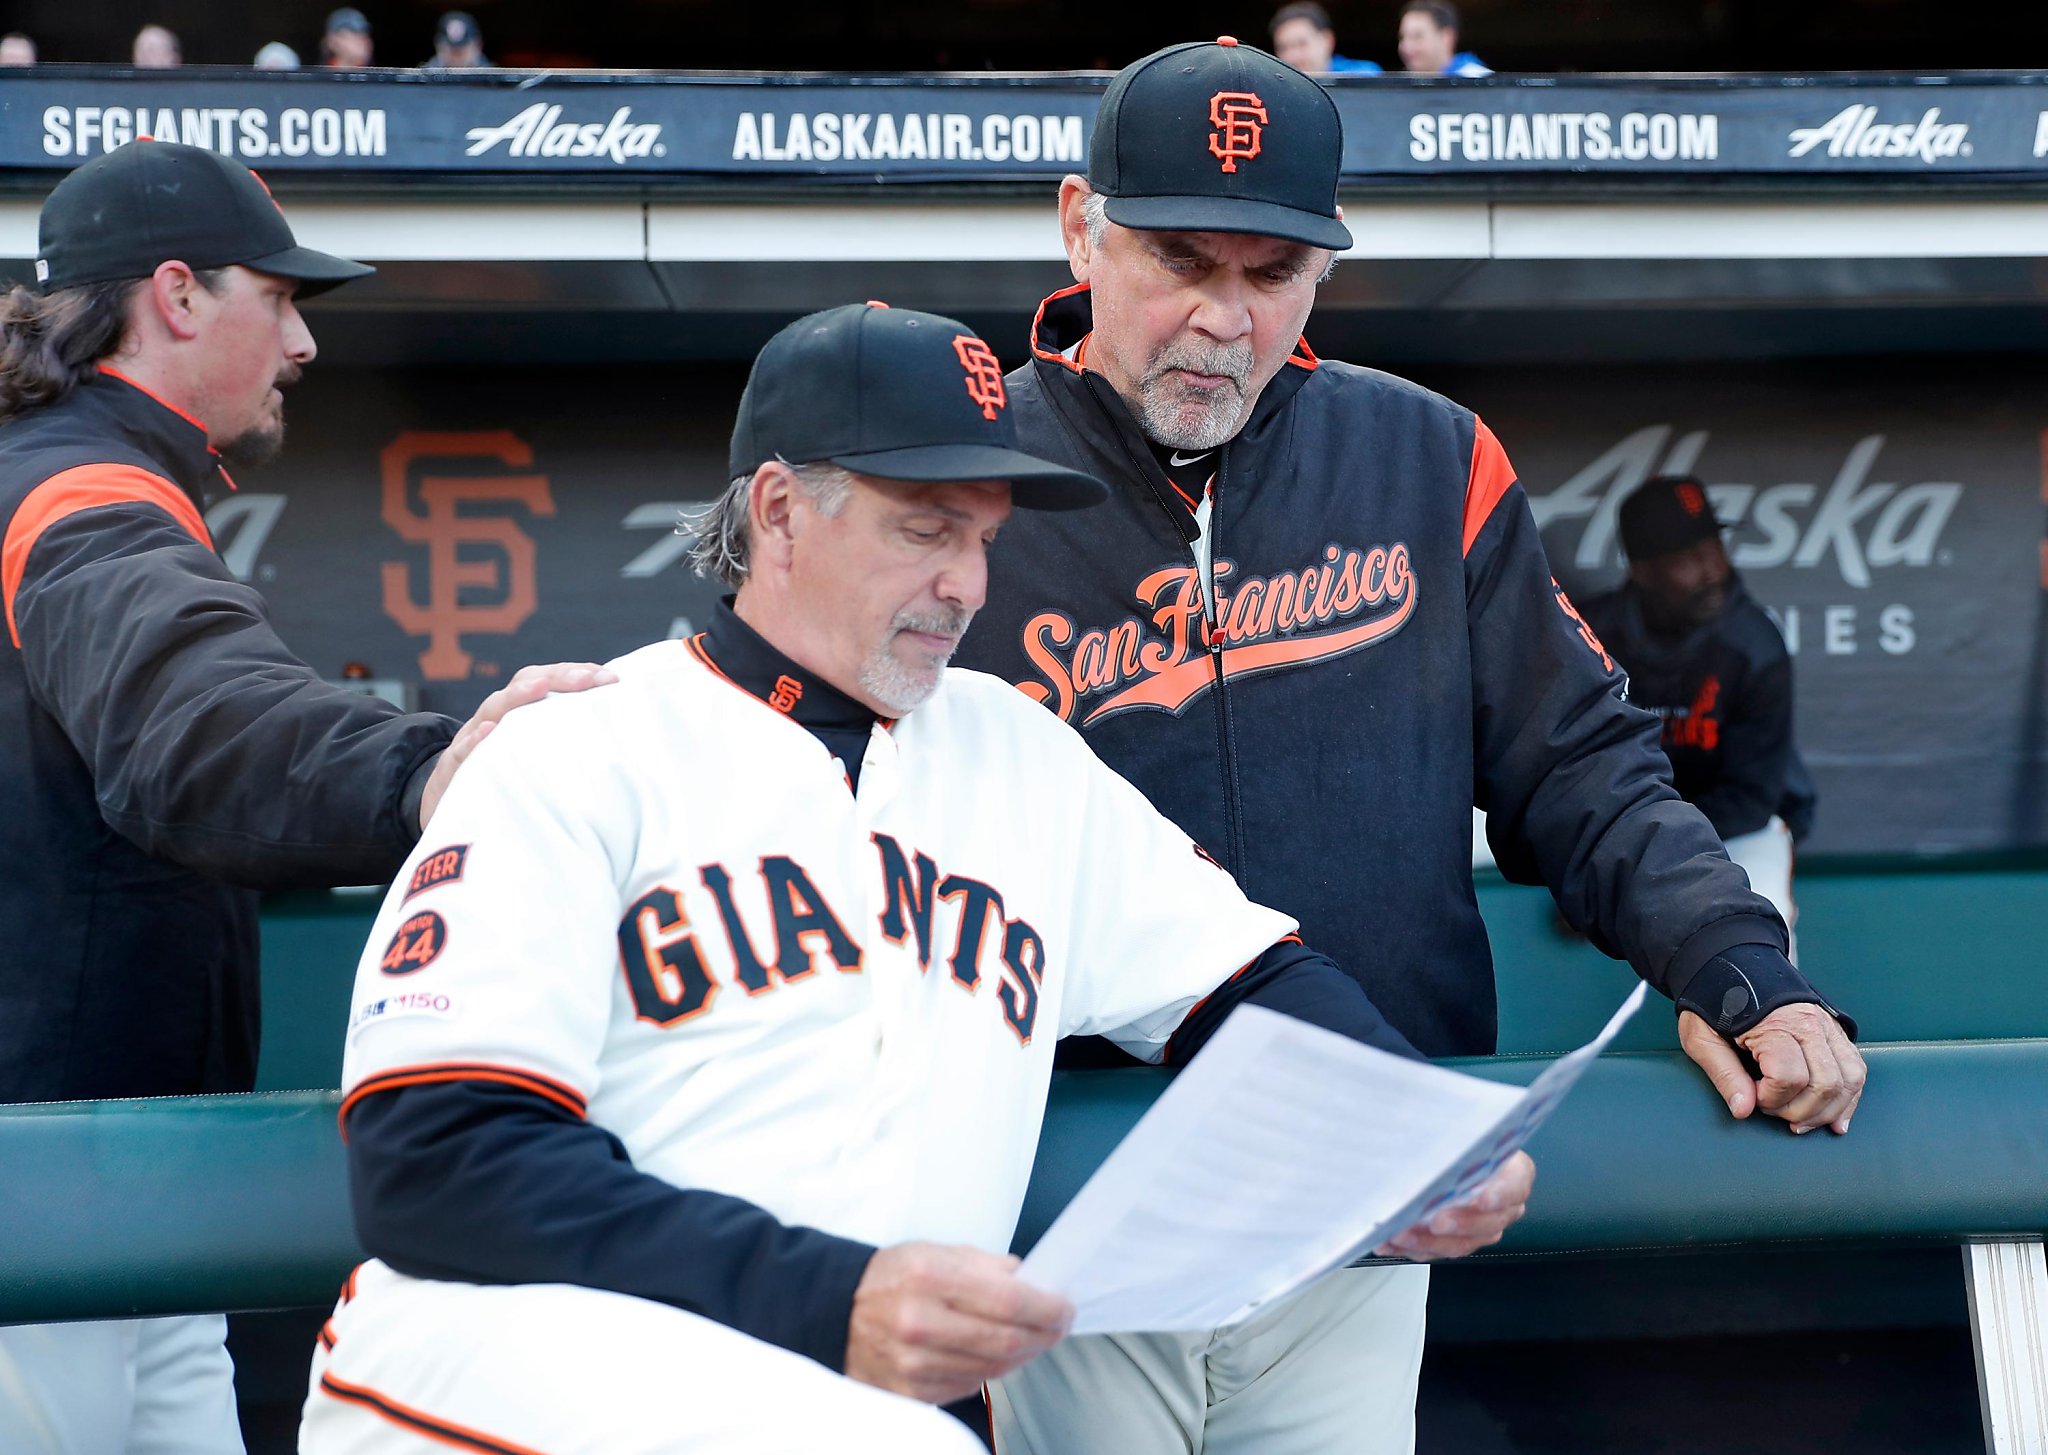 Brett Bochy in first spring camp with manager dad